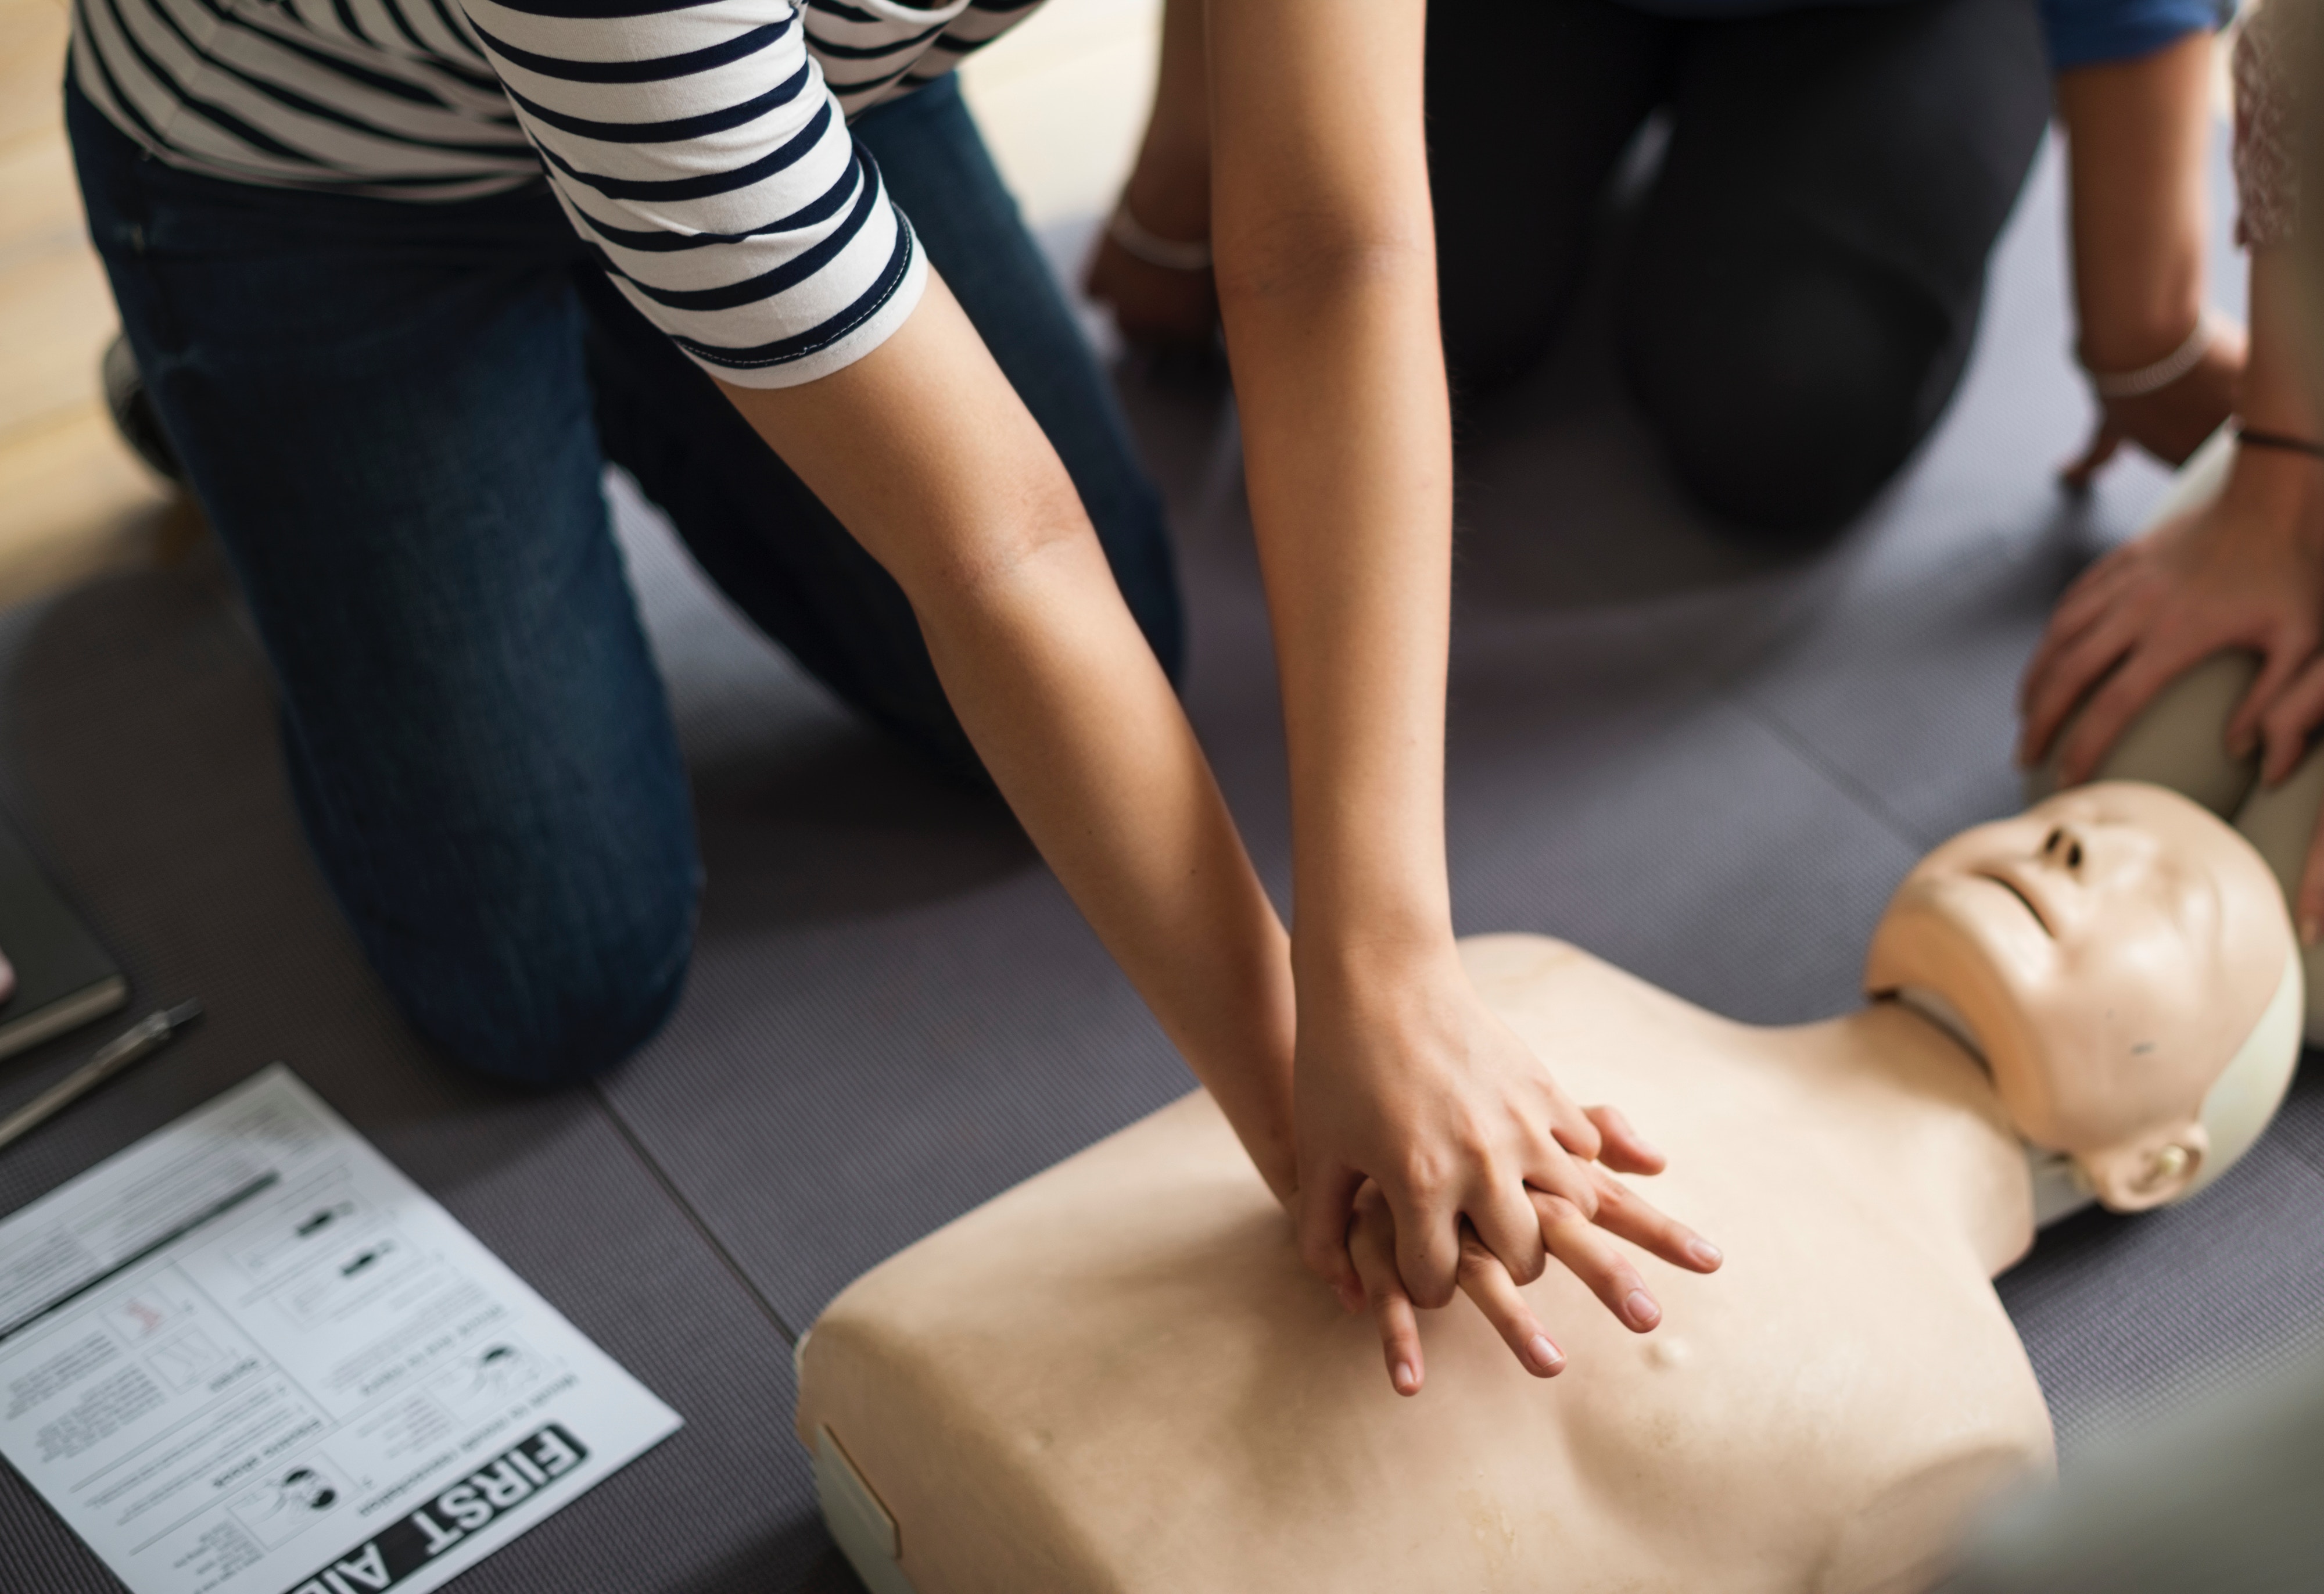 cpr being performed on a training dummy